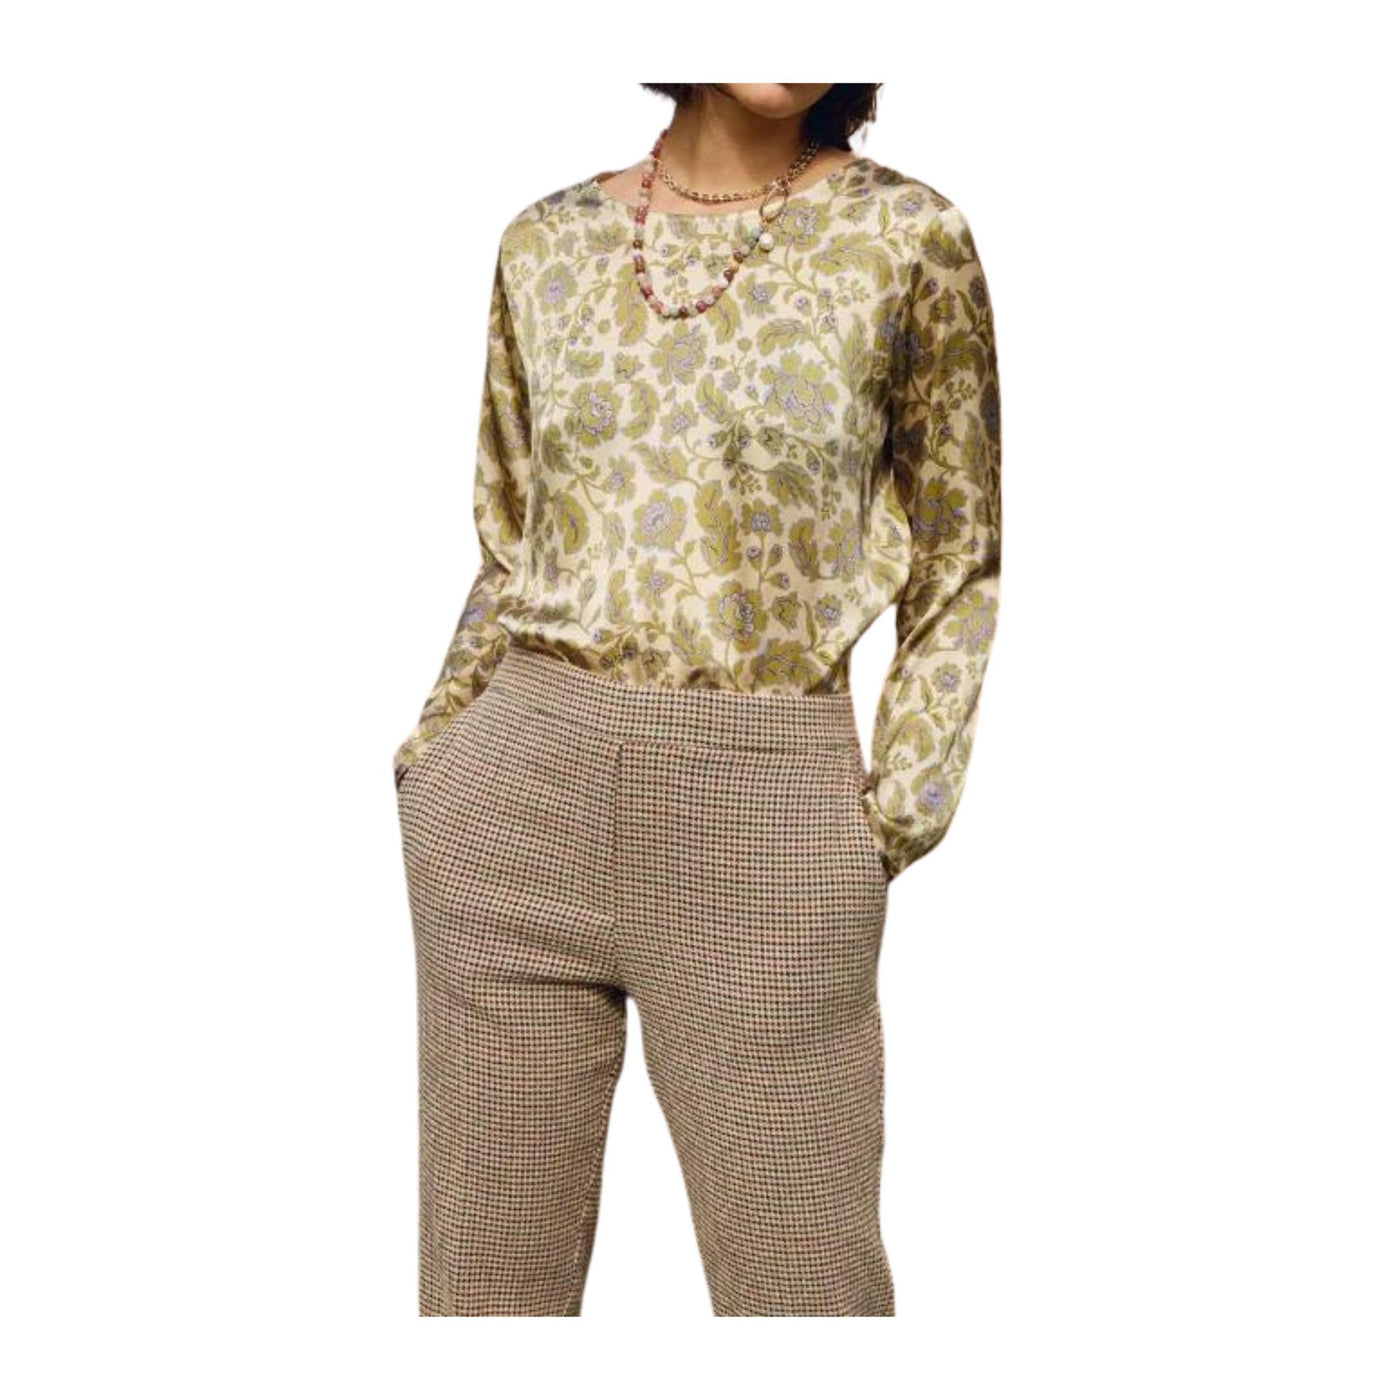 Women's blouse with printed pattern